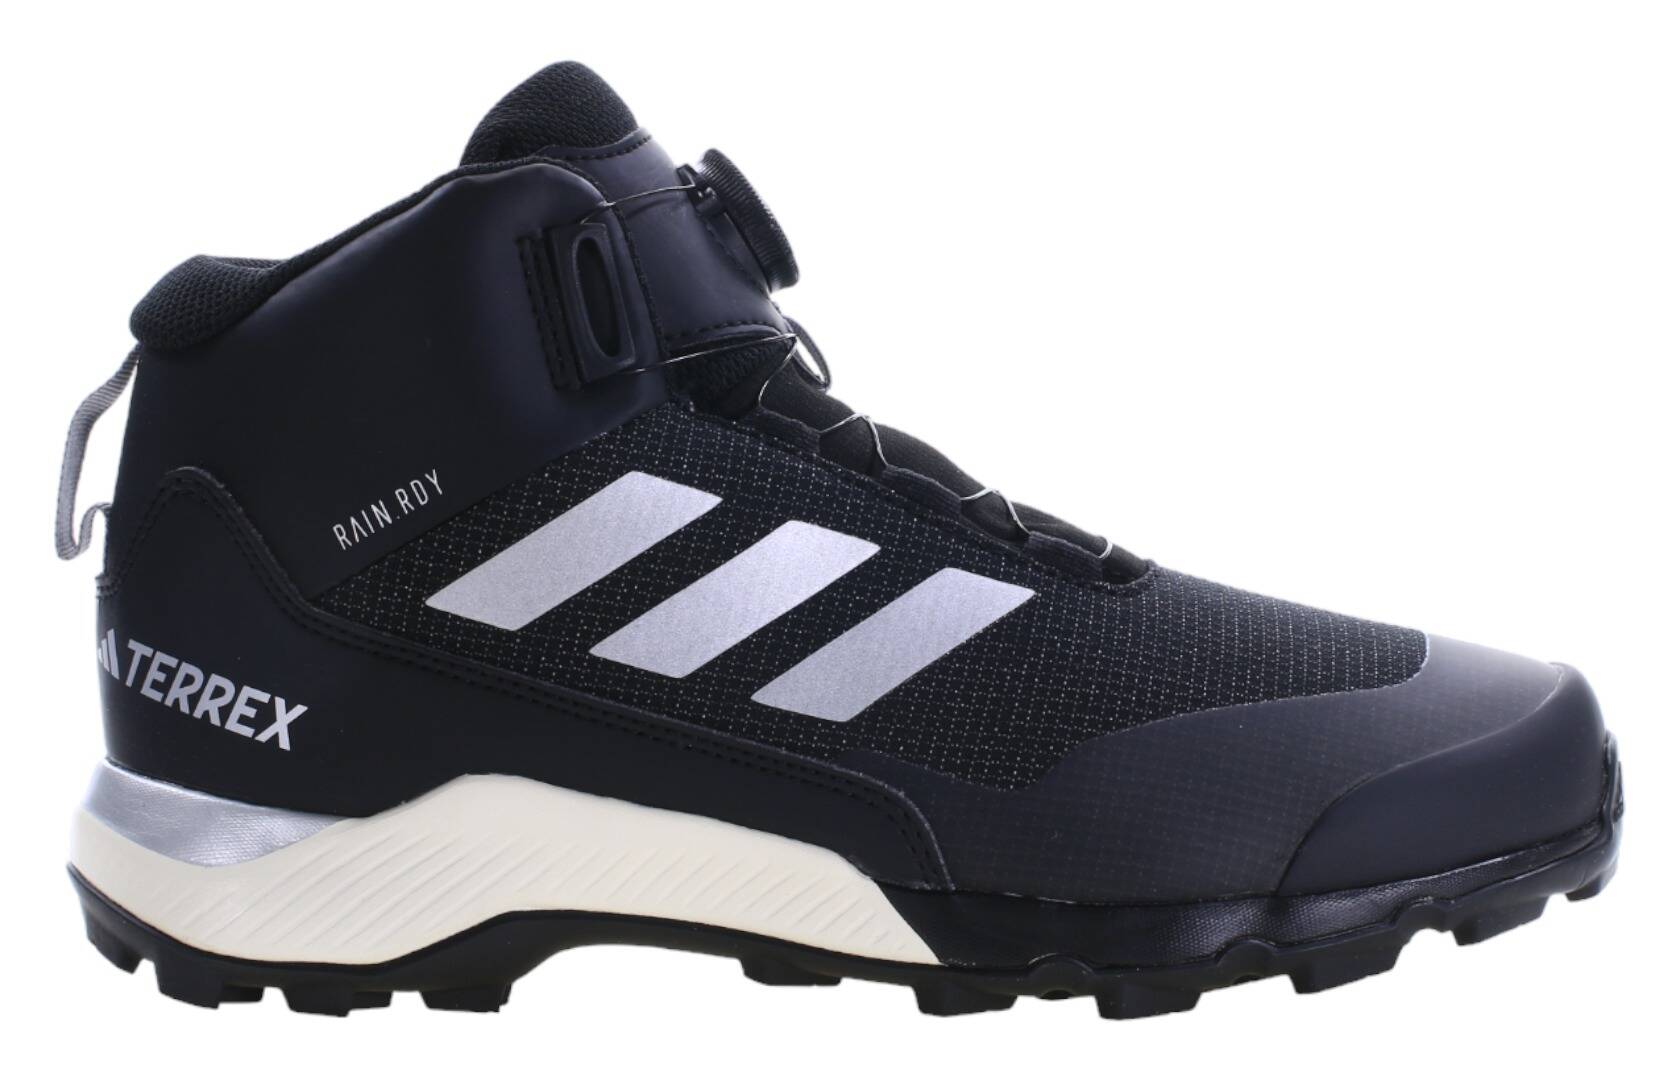 Adidas TERREX WINTER MID B IF7493 youth shoes